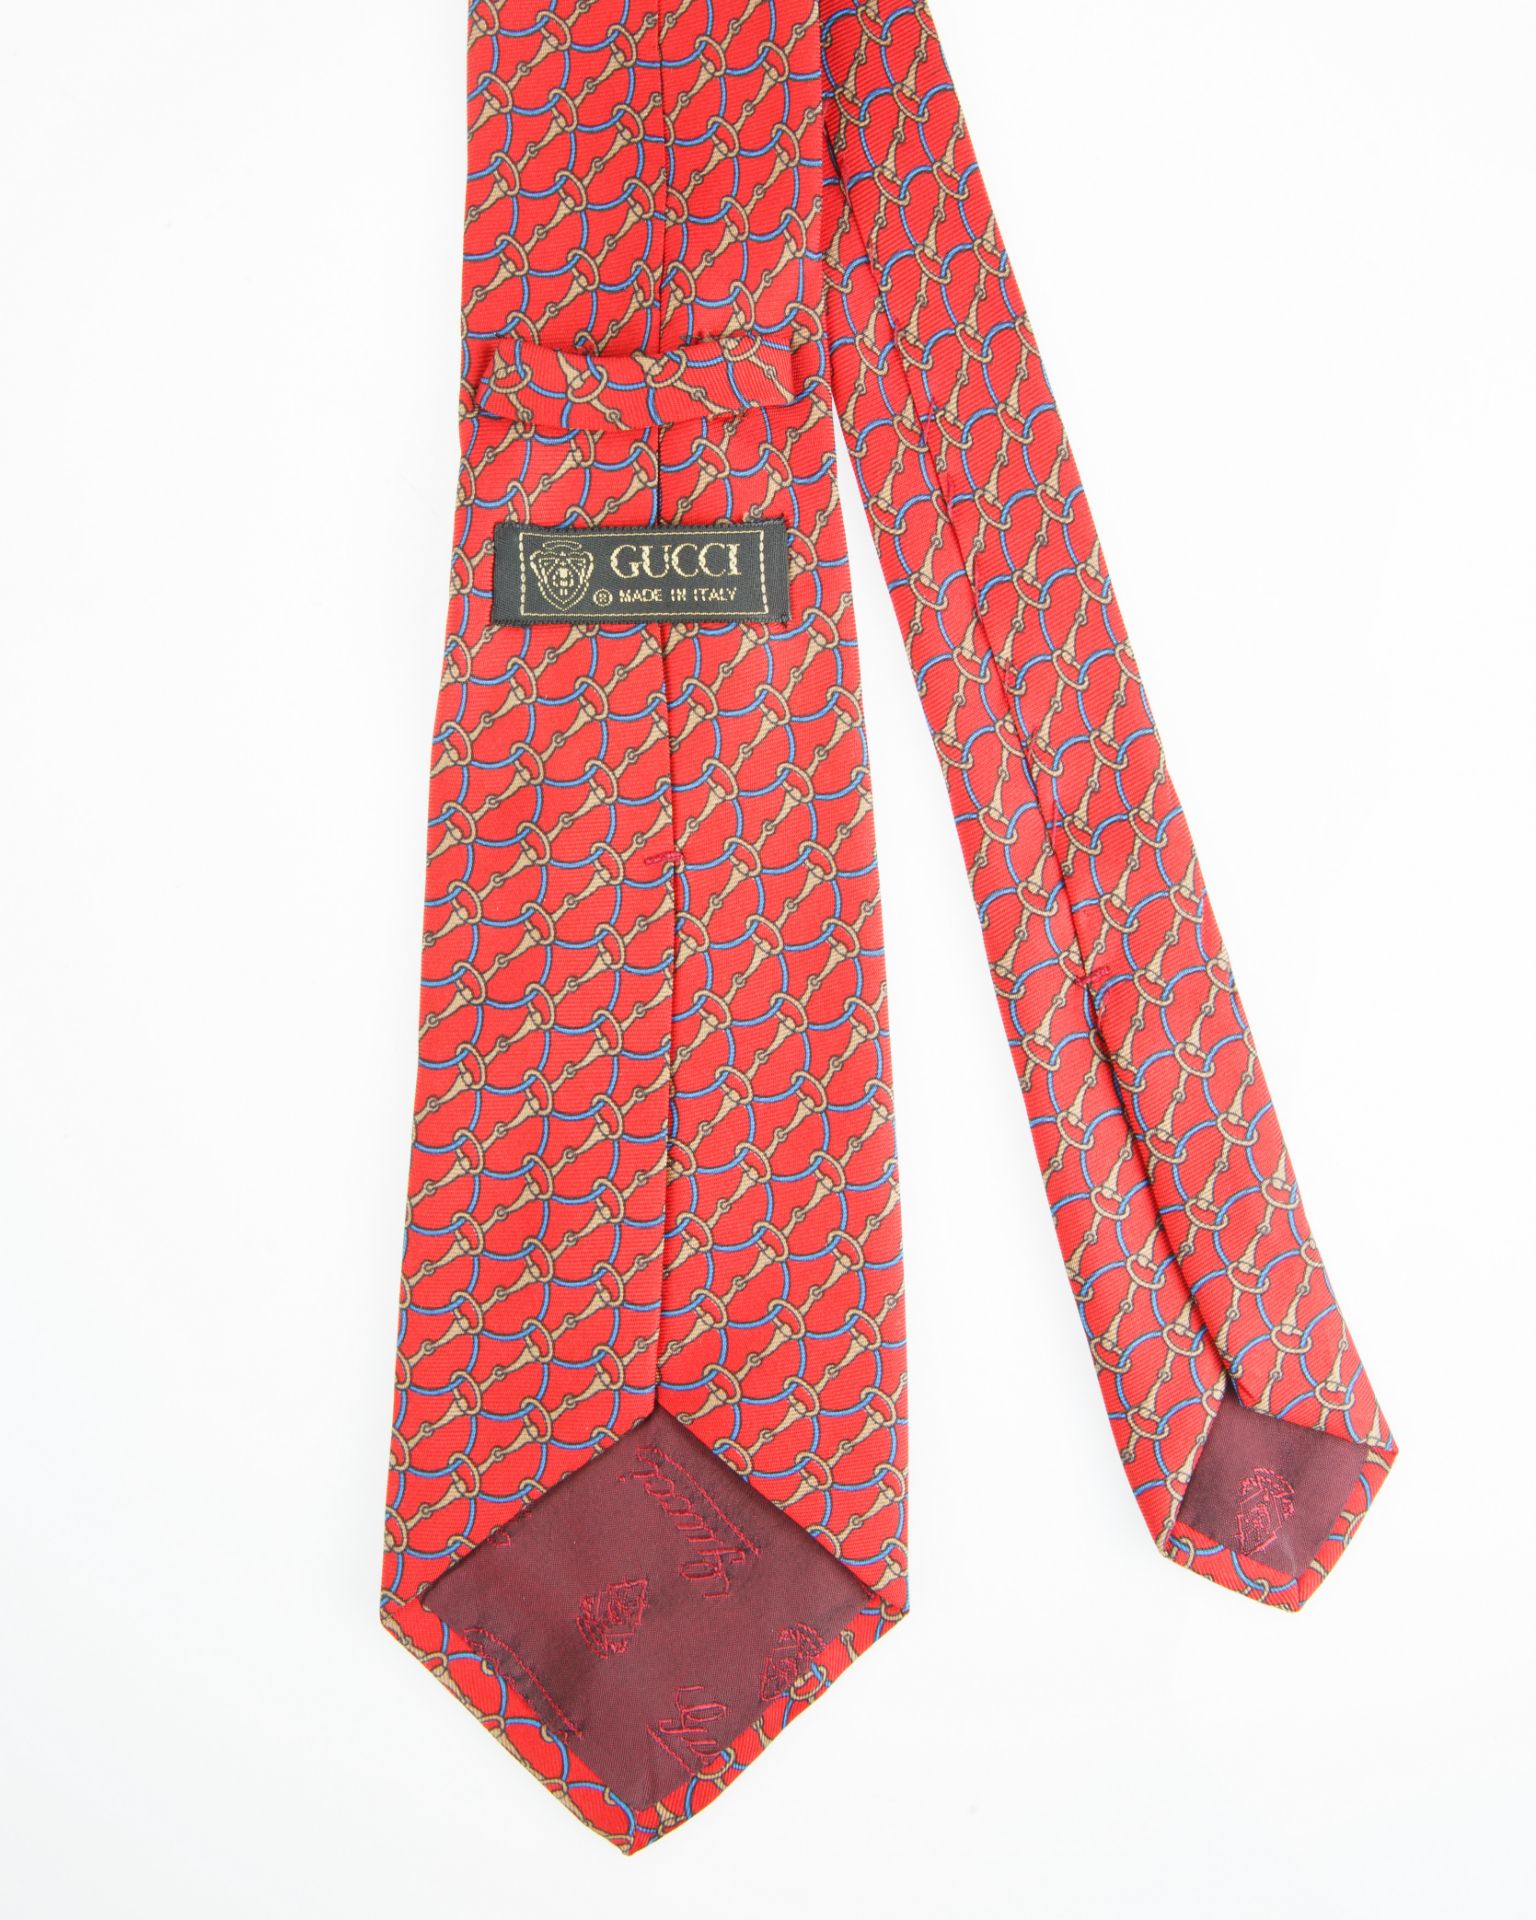 GROUP OF SEVEN GUCCI TIES - Image 3 of 15